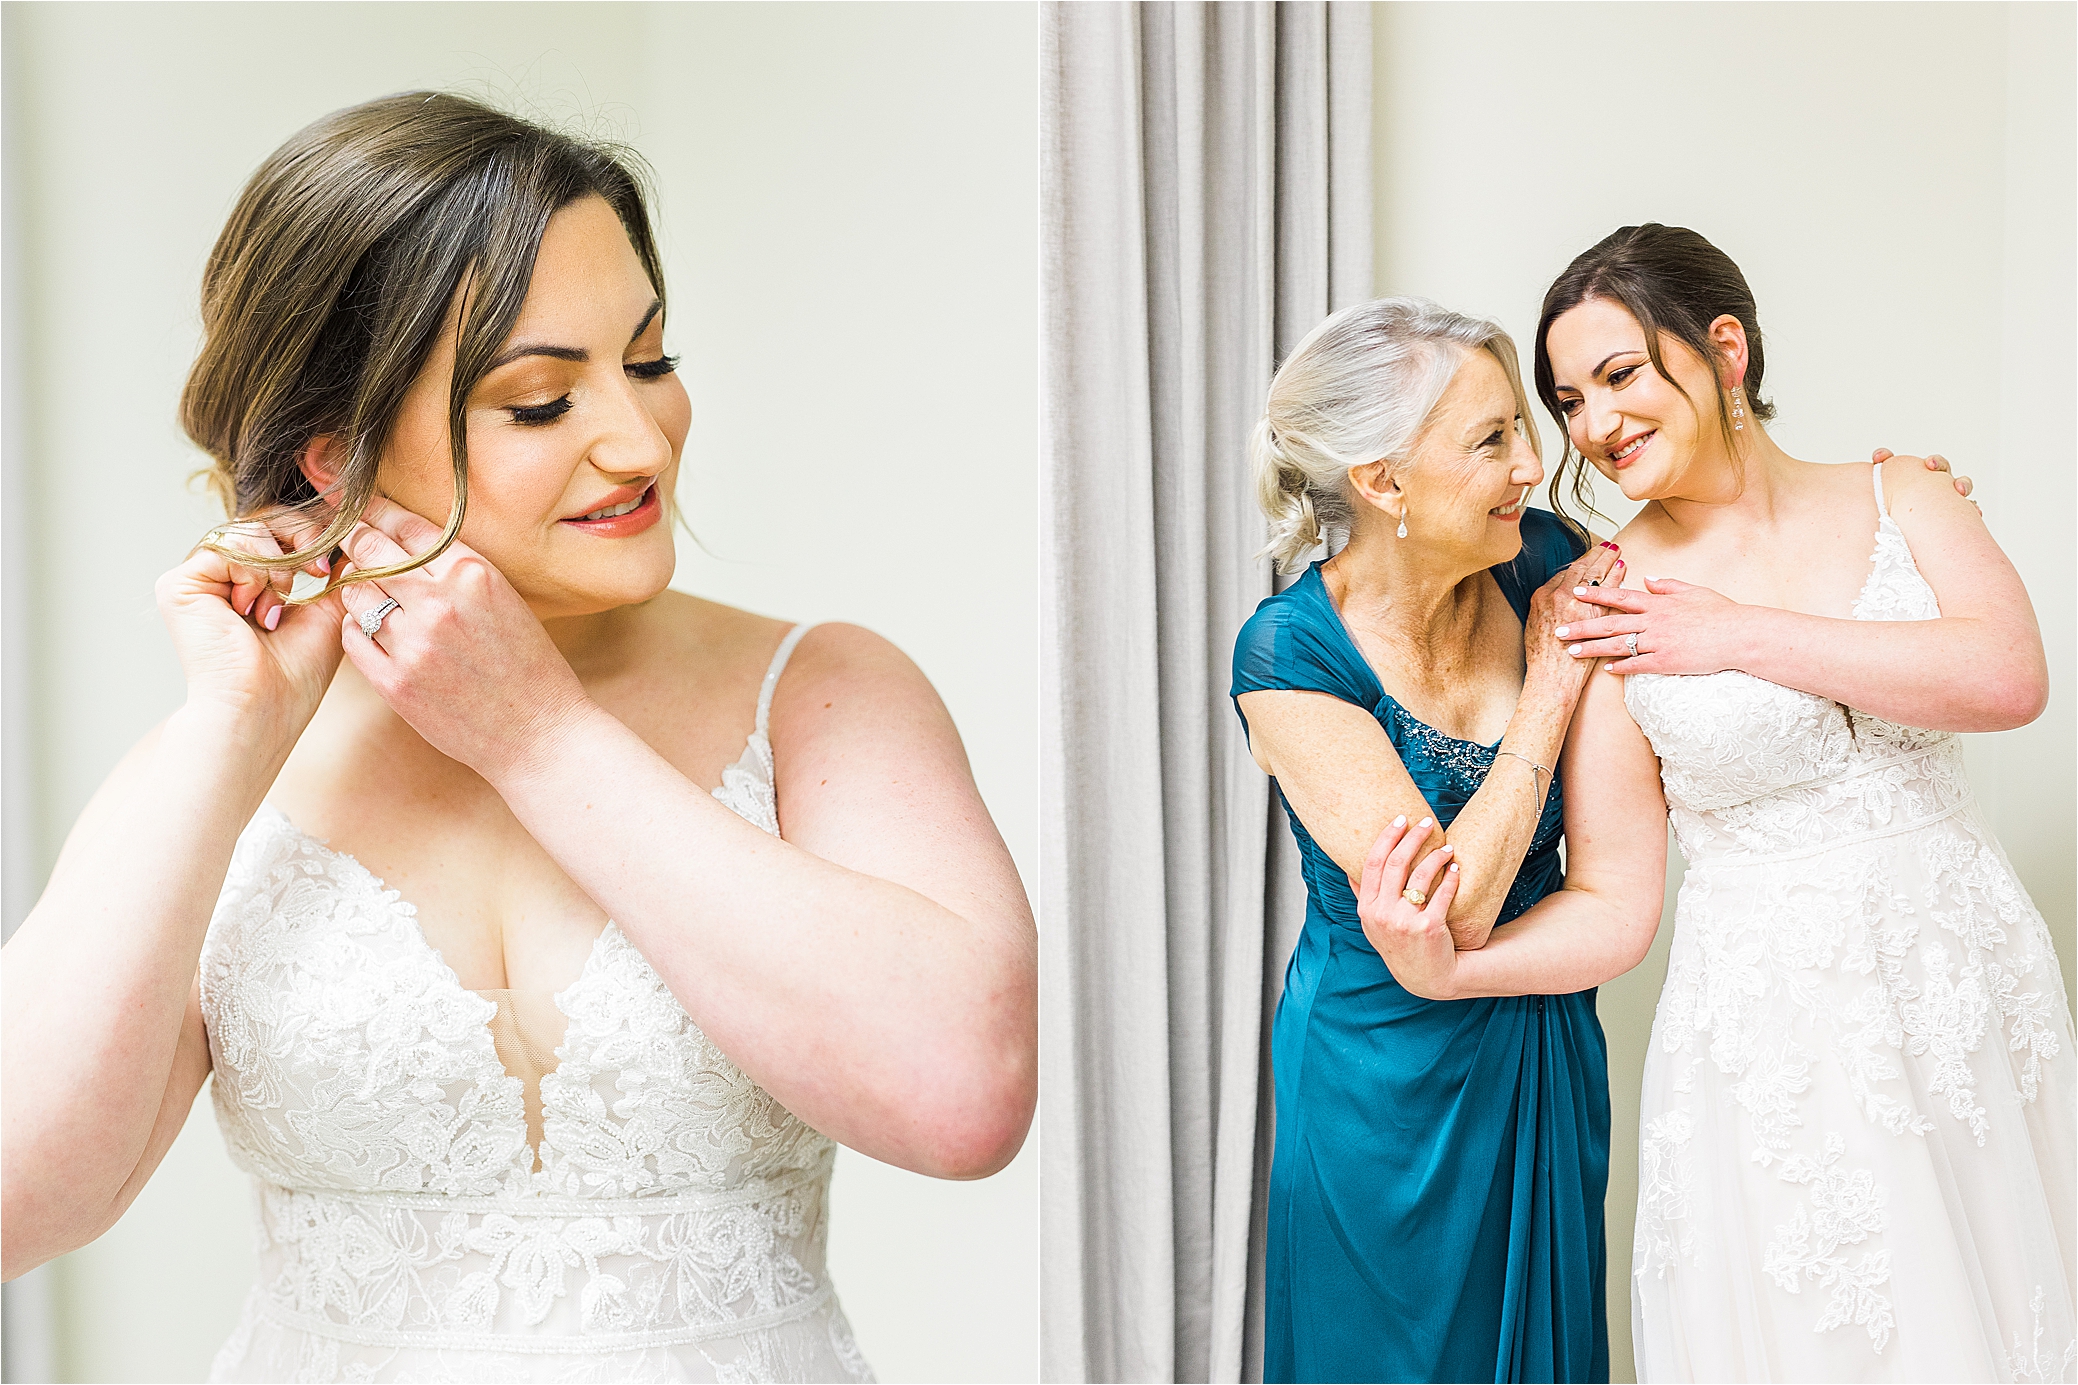 A bride to be in her wedding dress looks down as she puts on her earrings and hugs her mom after putting on her wedding dress inside the bridal suite at Alamo Heights United Methodist Church in San Antonio, Texas 